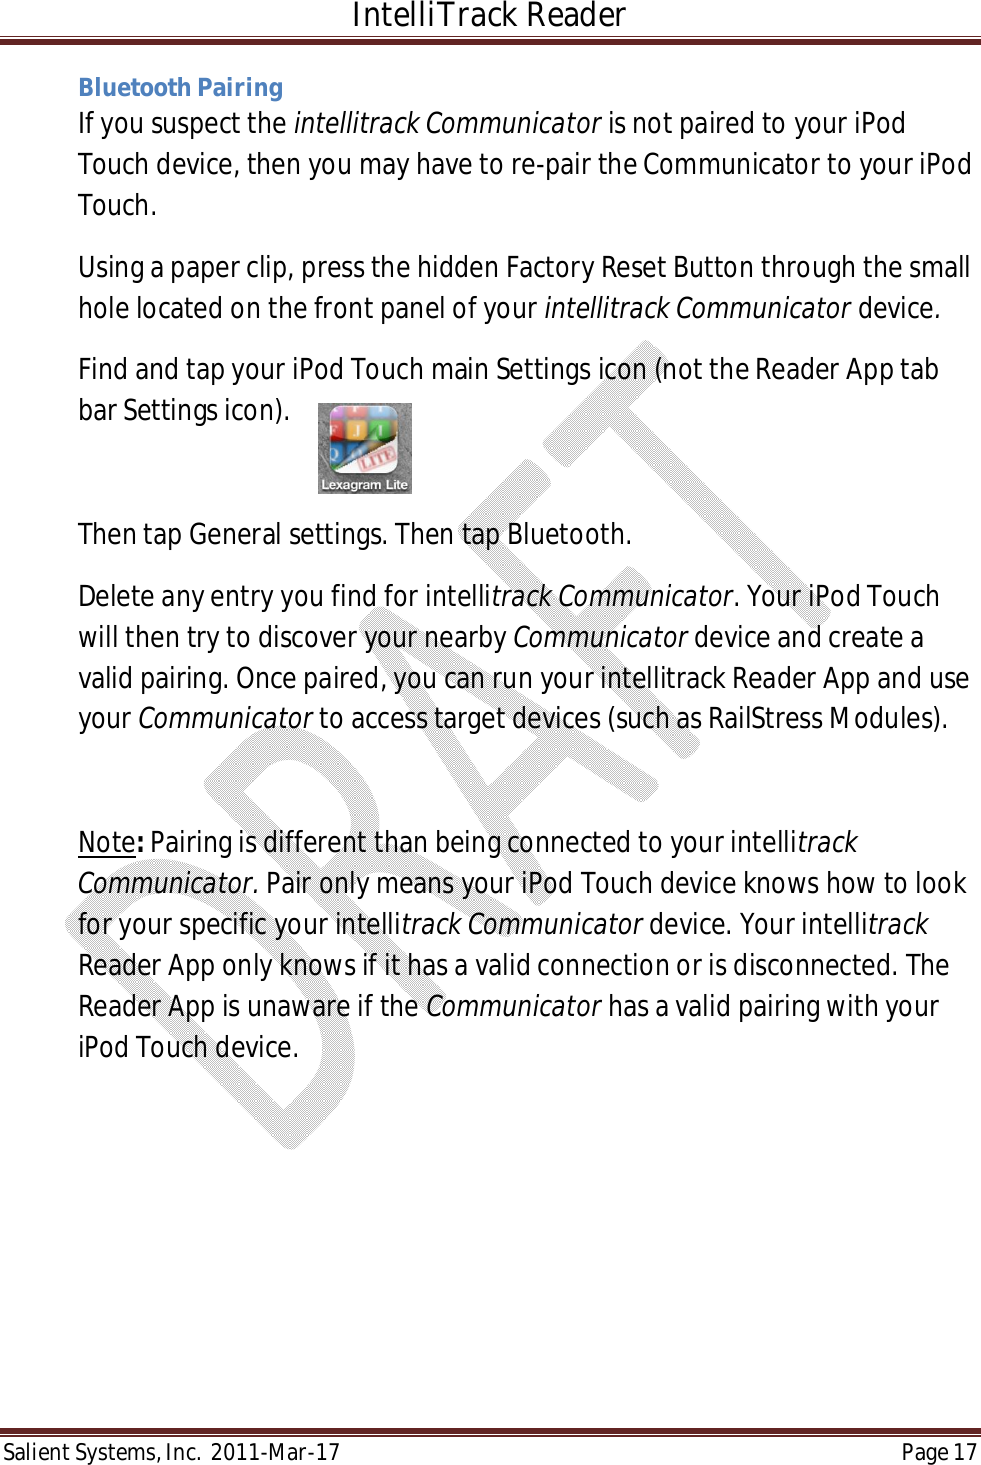 IntelliTrack Reader  Salient Systems, Inc.  2011-Mar-17 Page 17  Bluetooth Pairing If you suspect the intellitrack Communicator is not paired to your iPod Touch device, then you may have to re-pair the Communicator to your iPod Touch.  Using a paper clip, press the hidden Factory Reset Button through the small hole located on the front panel of your intellitrack Communicator device. Find and tap your iPod Touch main Settings icon (not the Reader App tab bar Settings icon).   Then tap General settings. Then tap Bluetooth. Delete any entry you find for intellitrack Communicator. Your iPod Touch will then try to discover your nearby Communicator device and create a valid pairing. Once paired, you can run your intellitrack Reader App and use your Communicator to access target devices (such as RailStress Modules).  Note: Pairing is different than being connected to your intellitrack Communicator. Pair only means your iPod Touch device knows how to look for your specific your intellitrack Communicator device. Your intellitrack Reader App only knows if it has a valid connection or is disconnected. The Reader App is unaware if the Communicator has a valid pairing with your iPod Touch device. 